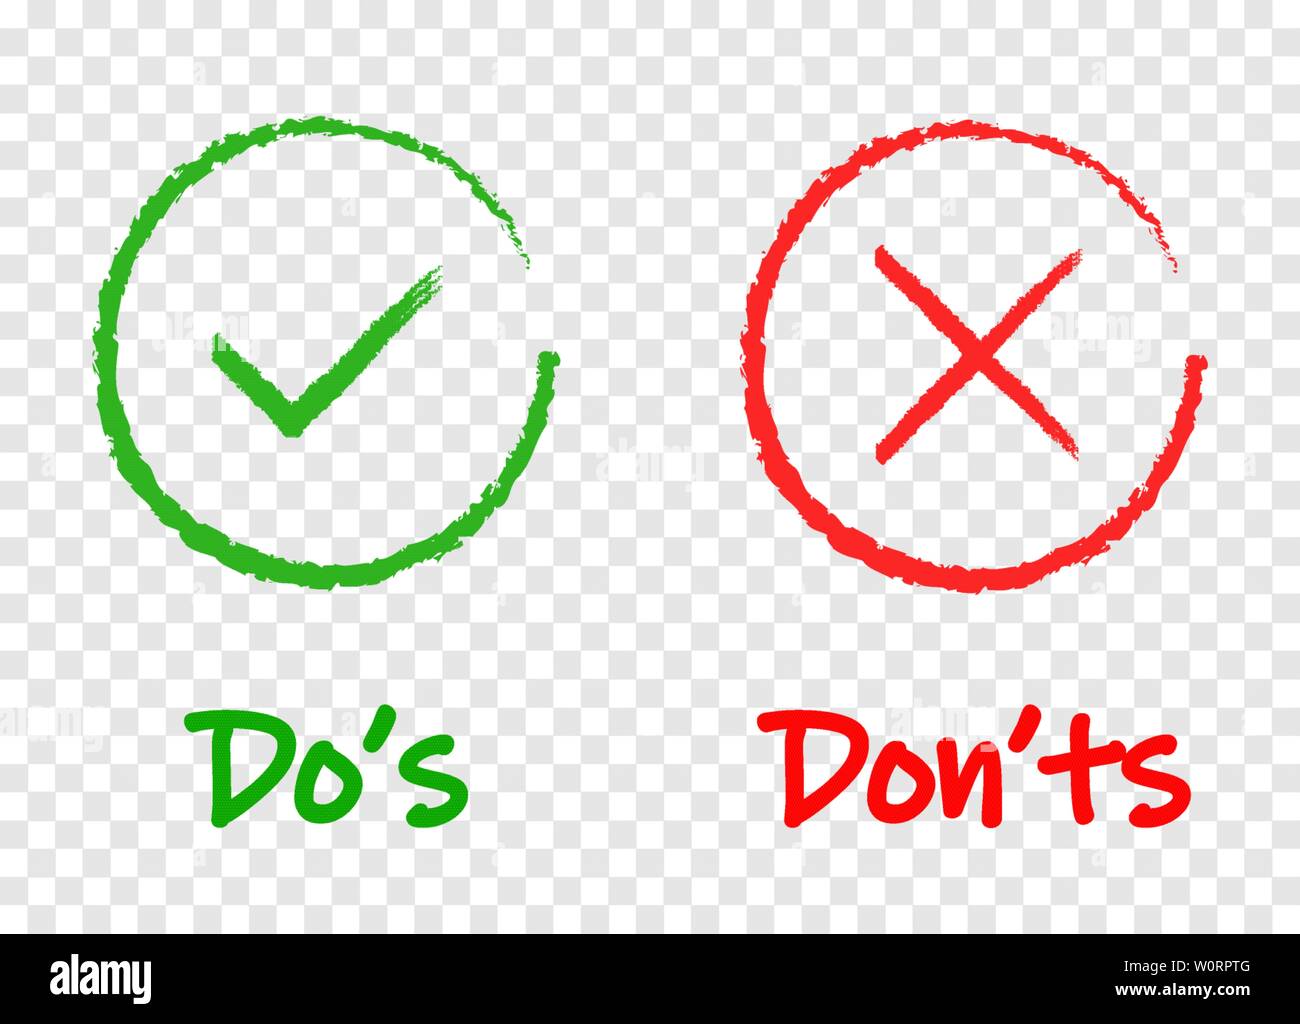 Do and Don t or Good and Bad Icons. Positive and Negative Symbols, eps 10 Stock Vector